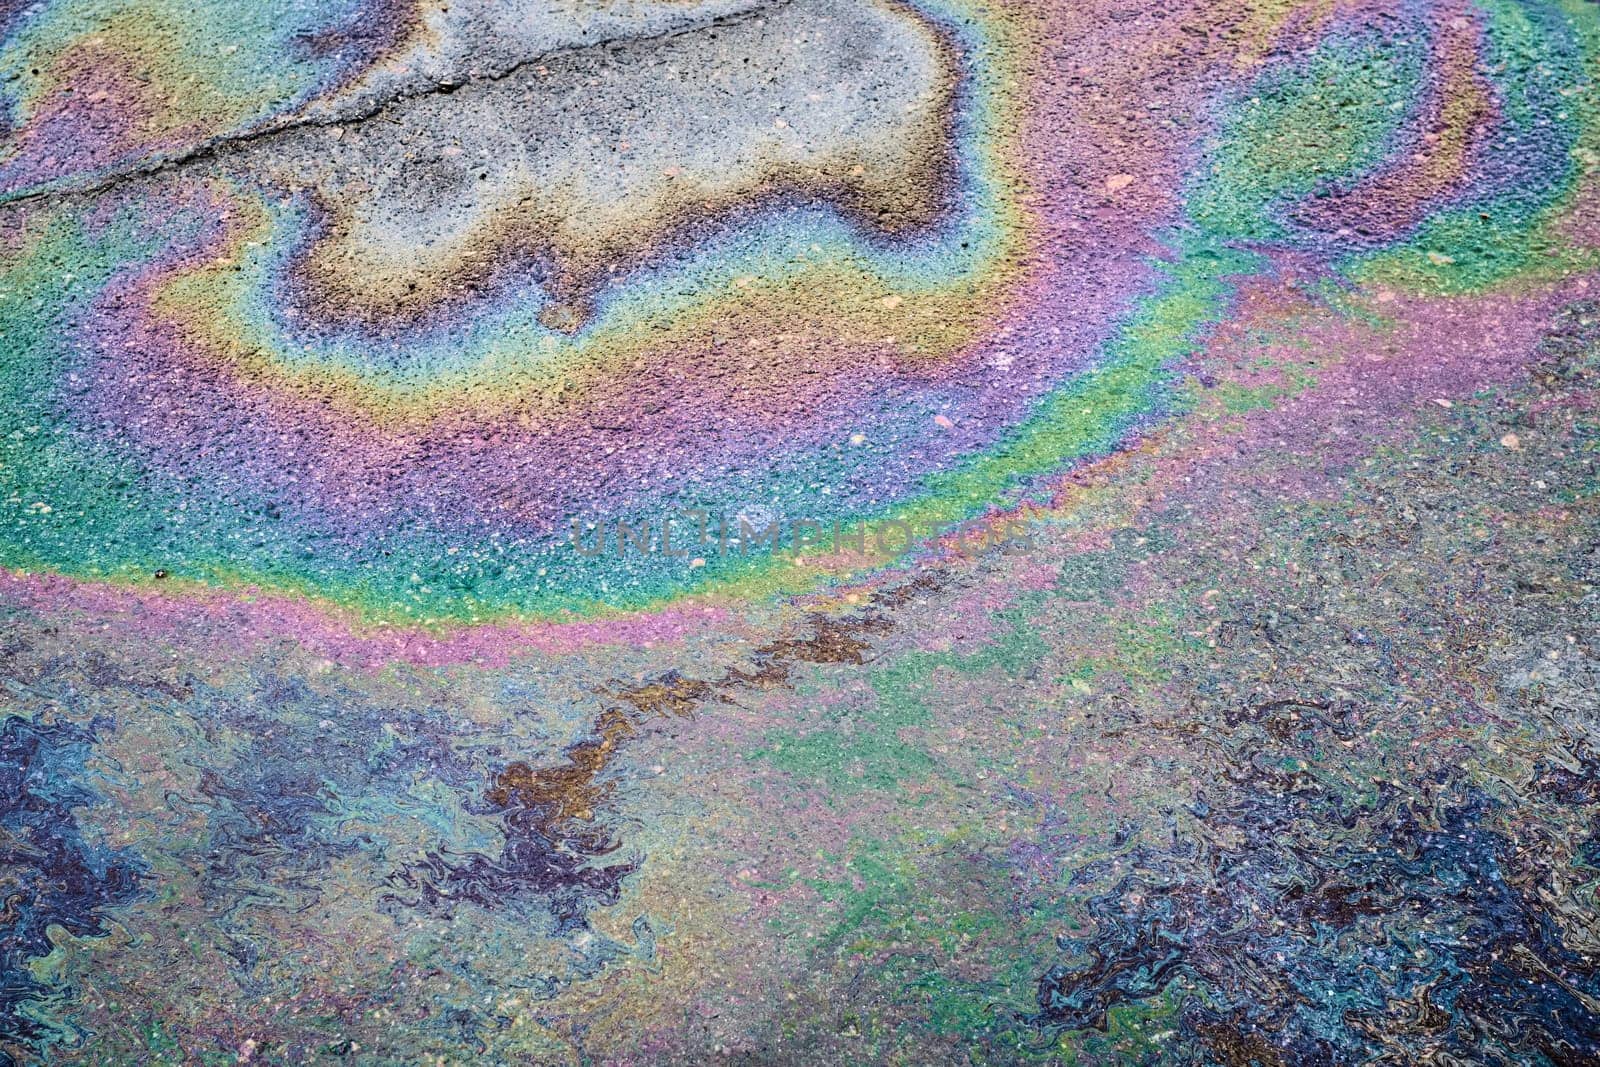 Textured stain of fuel or oil on wet asphalt on a rainy day. The concept of environmental pollution.